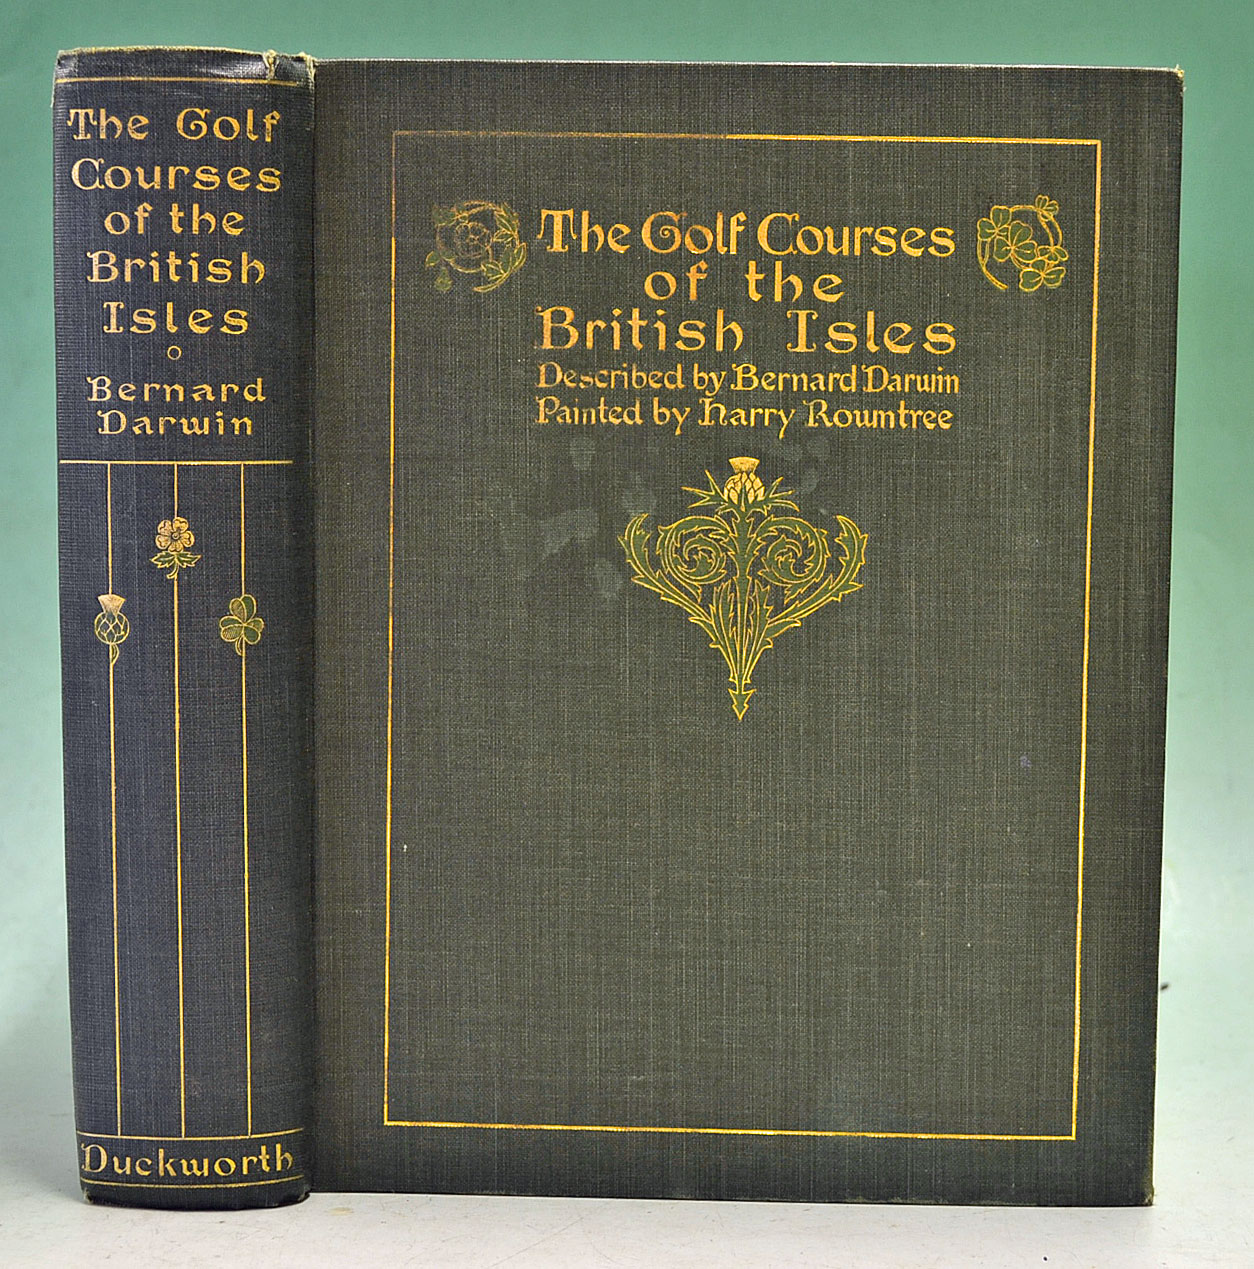 Darwin, Bernard - “The Golf Courses of the British Isles" 1st edition 1910 with 64 illustrations